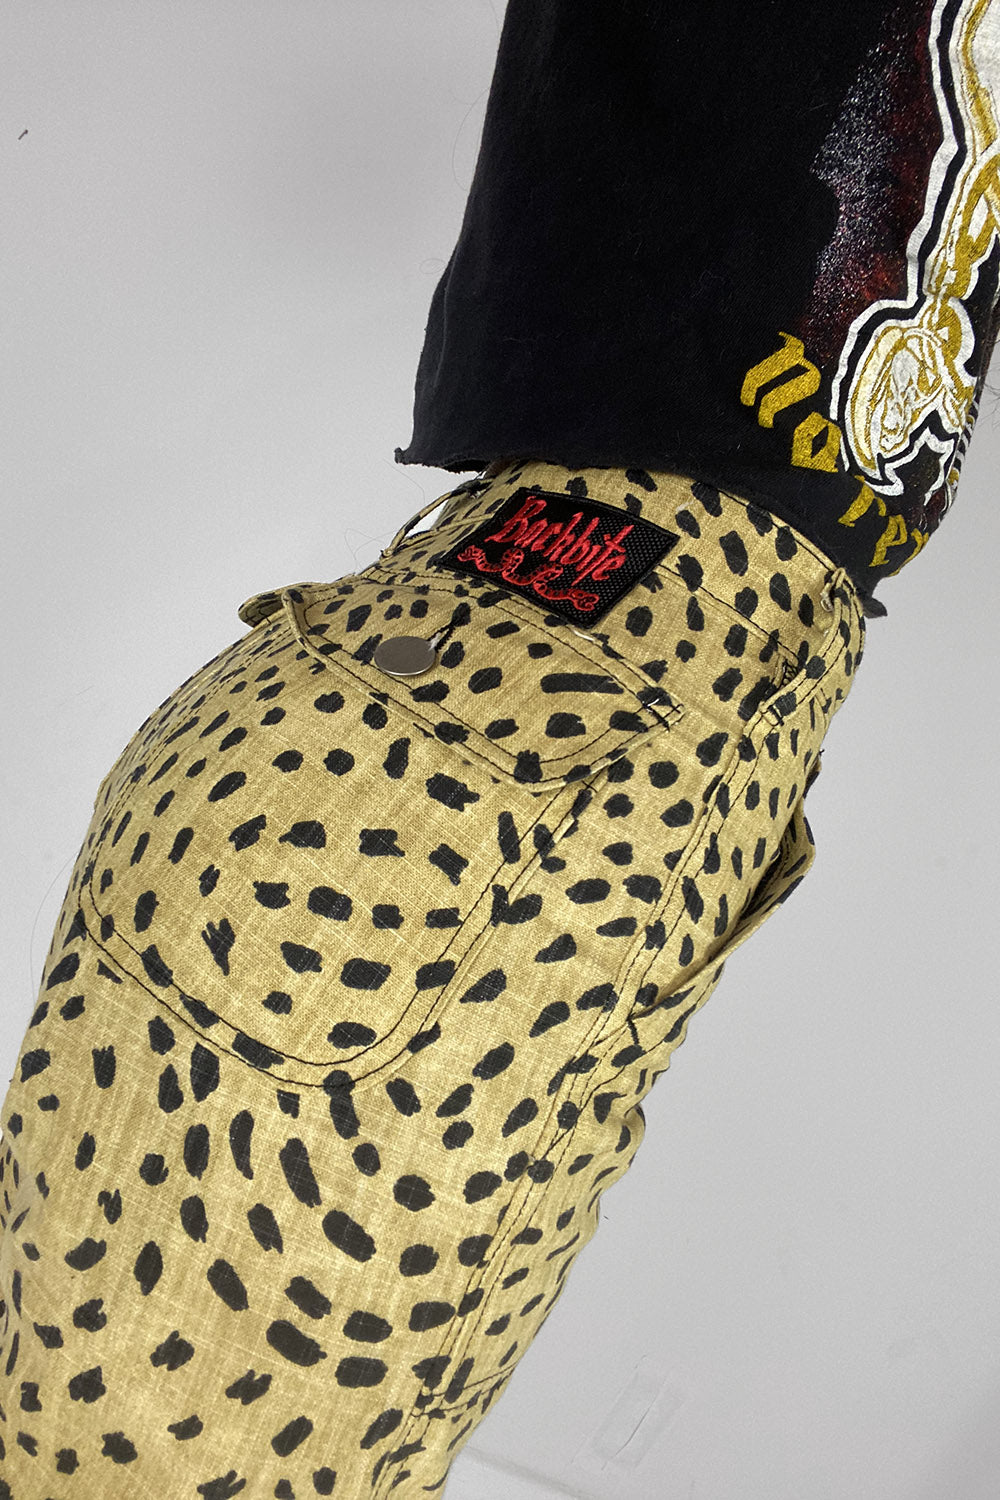 FLASH SALE! OG-107 Utility Pants in Cheetah Print | Made To Order (27 In Stock)